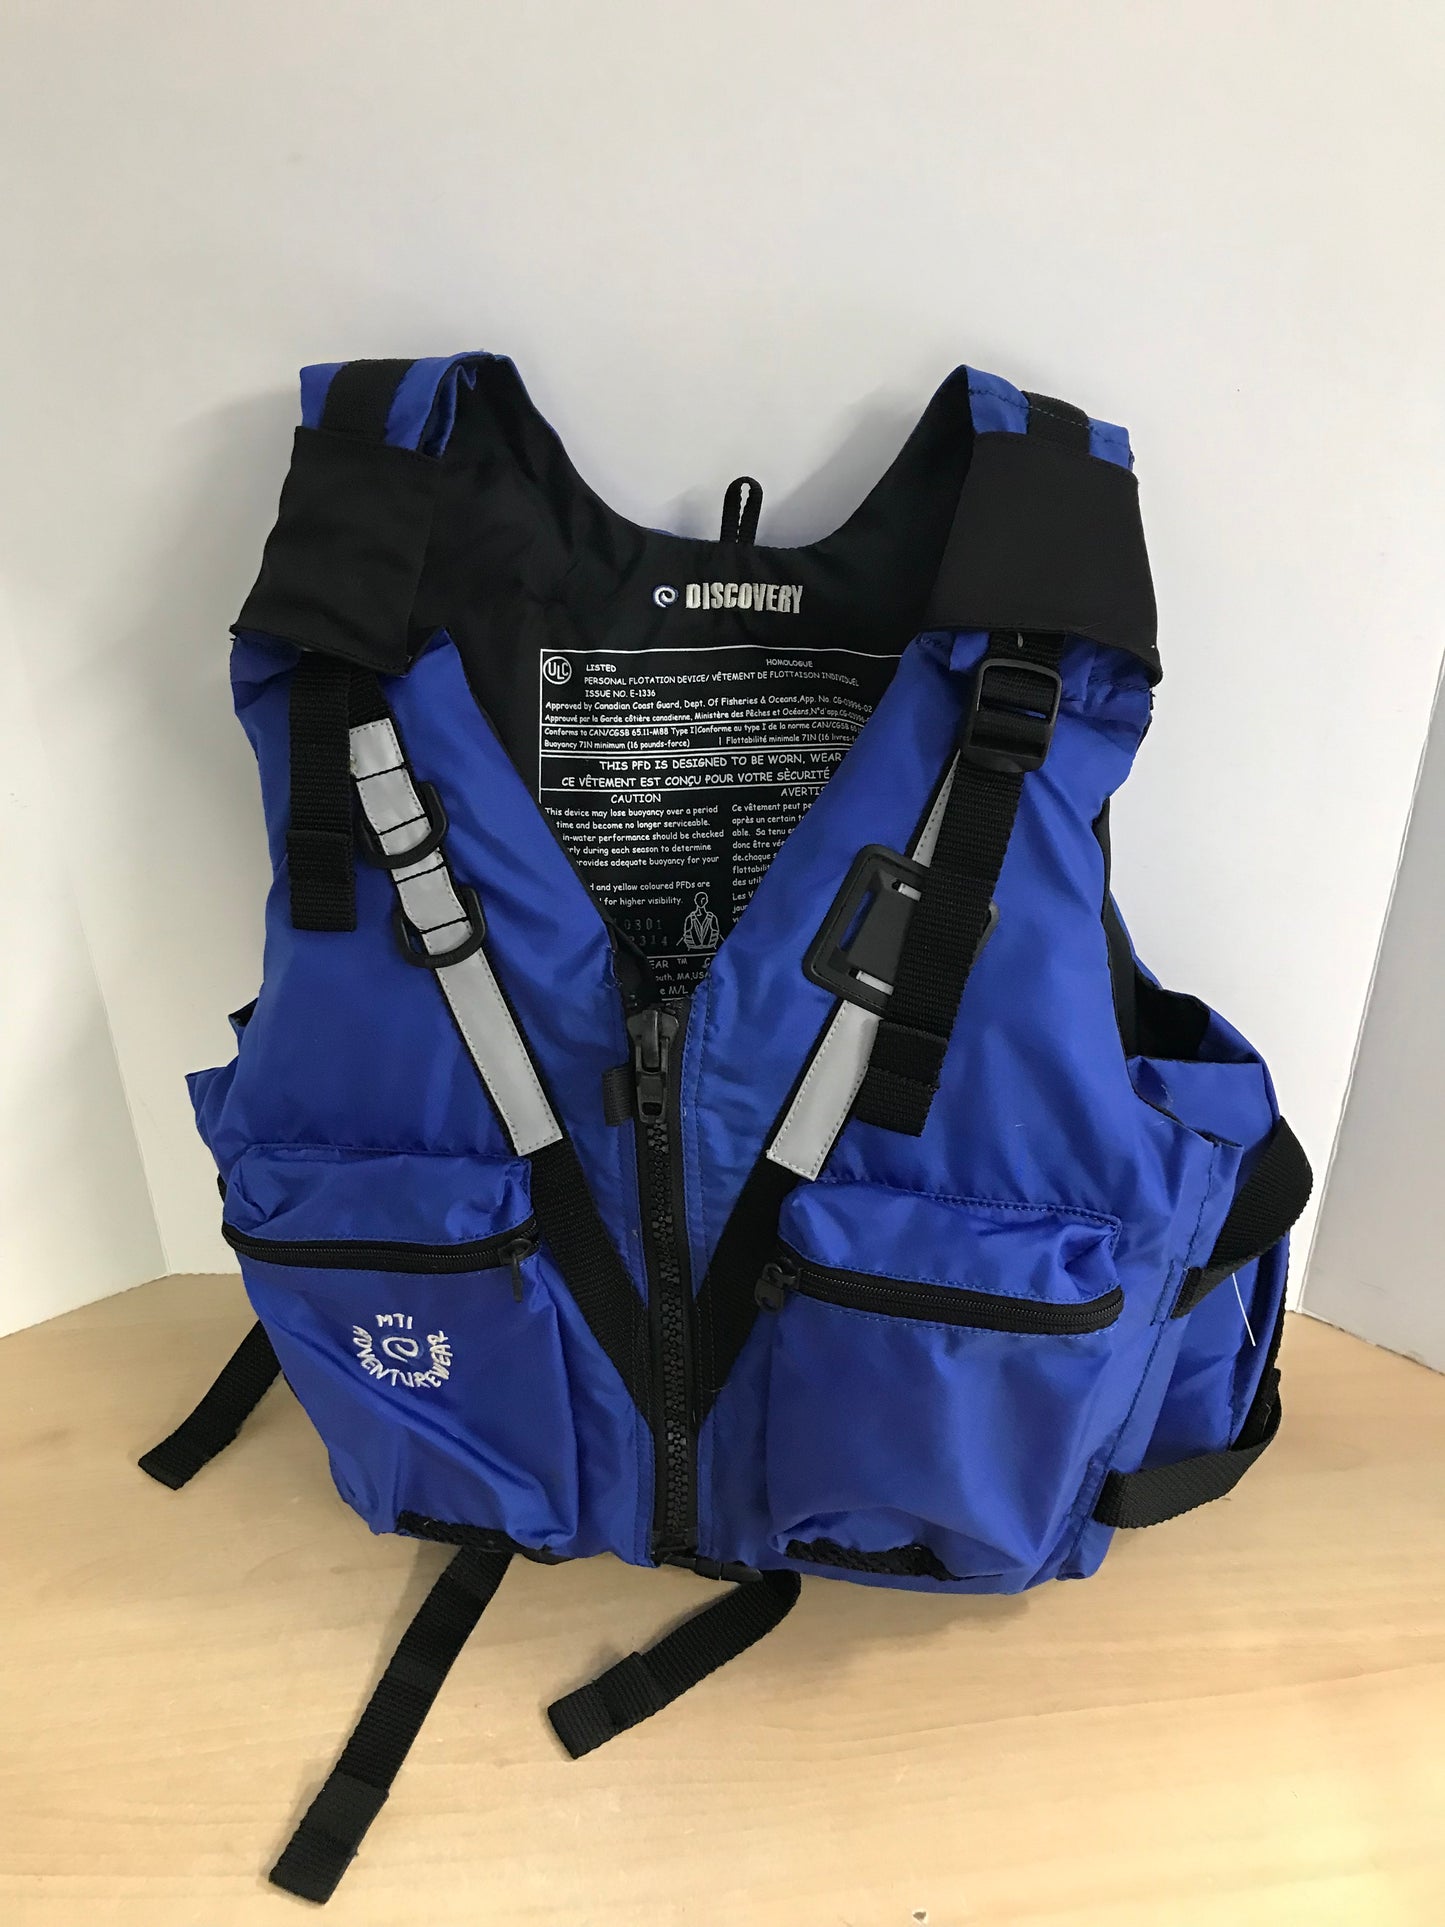 Life Jacket Adult Size M-Large Adjustable Water Sports With Pockets Pouches Added Straps Kayak Paddle Fishing Canoe As New Blue